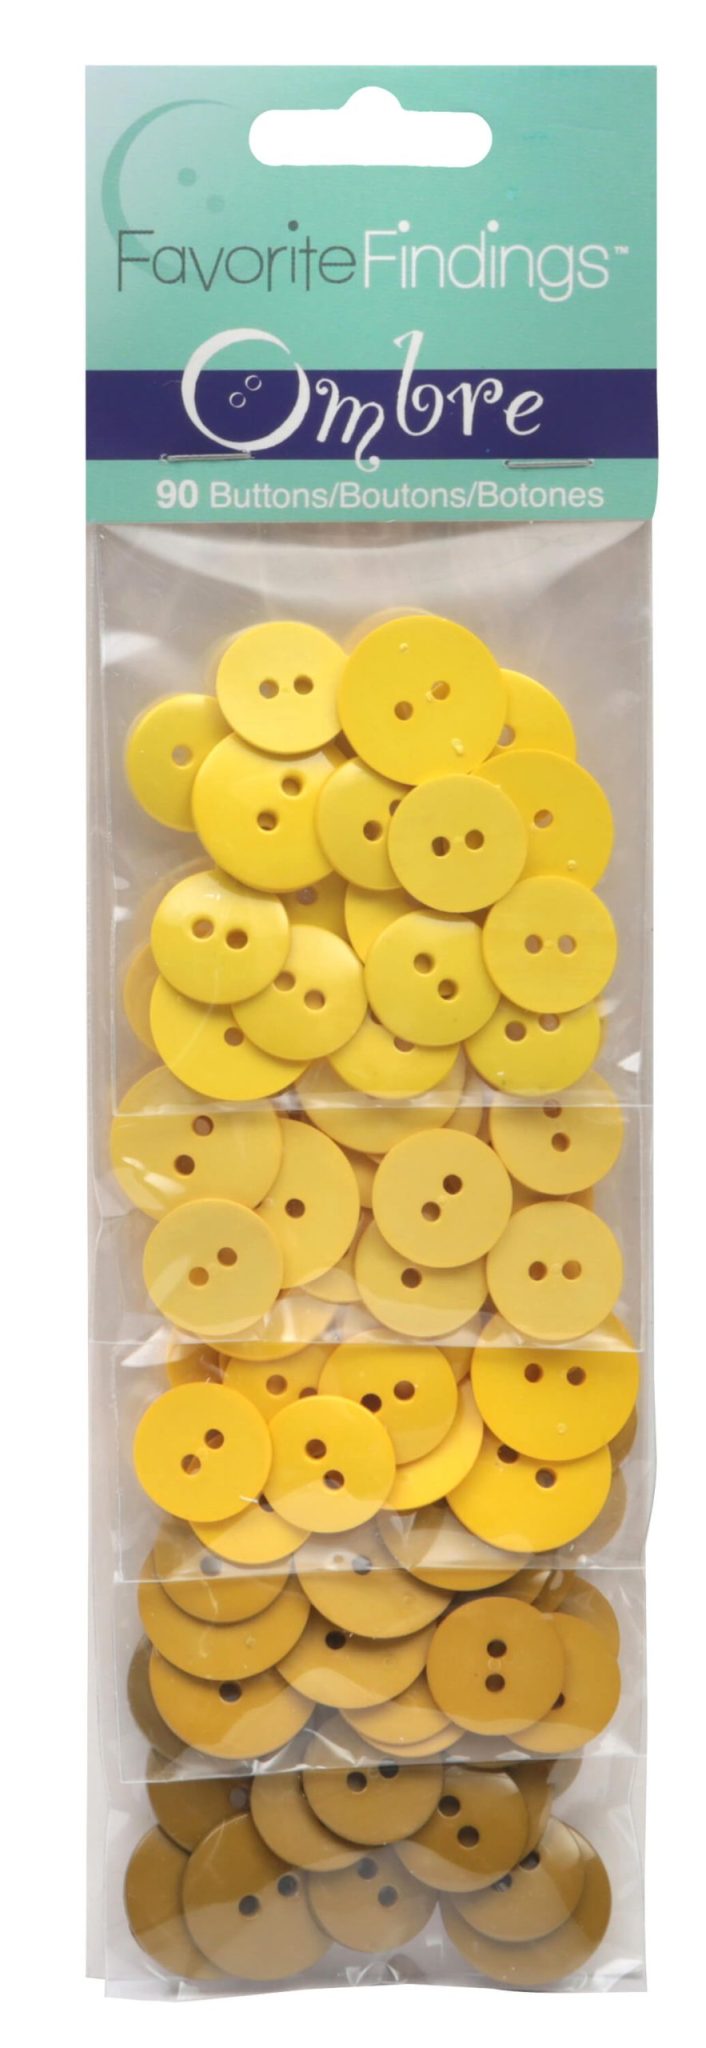 Ombre 90 Button Shade Pack - 5 Shades of Yellow 16mm / 19mm Buttons